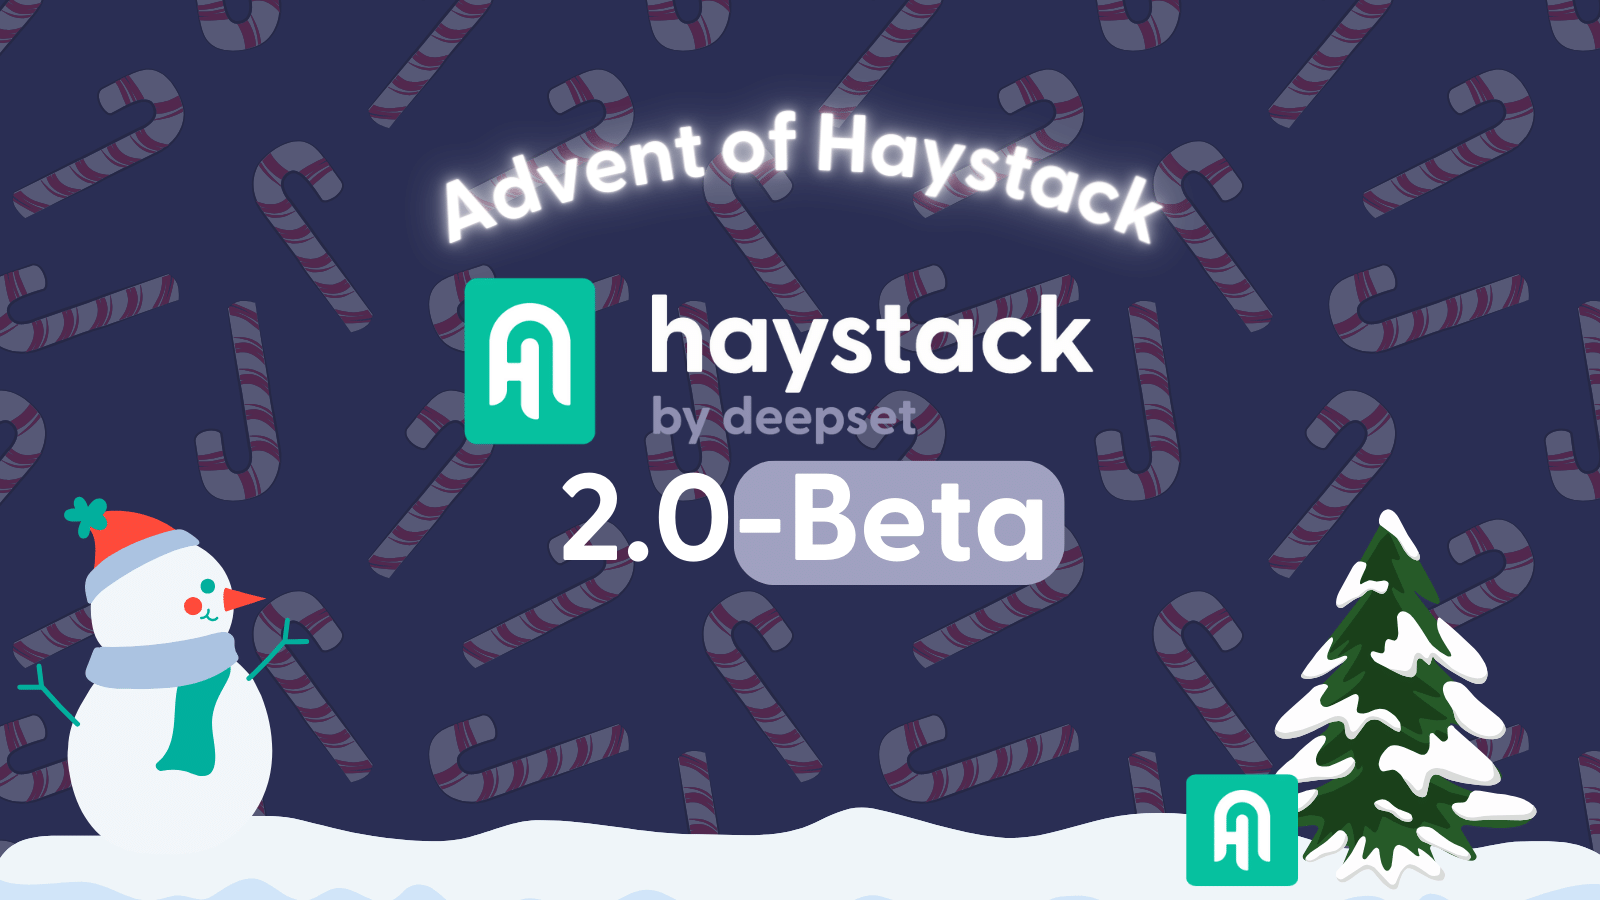 Festive-themed visual with snowman, christmas tree and text displaying &lsquo;Haystack 2.0-Beta&rsquo; and &lsquo;Advent of Haystack.